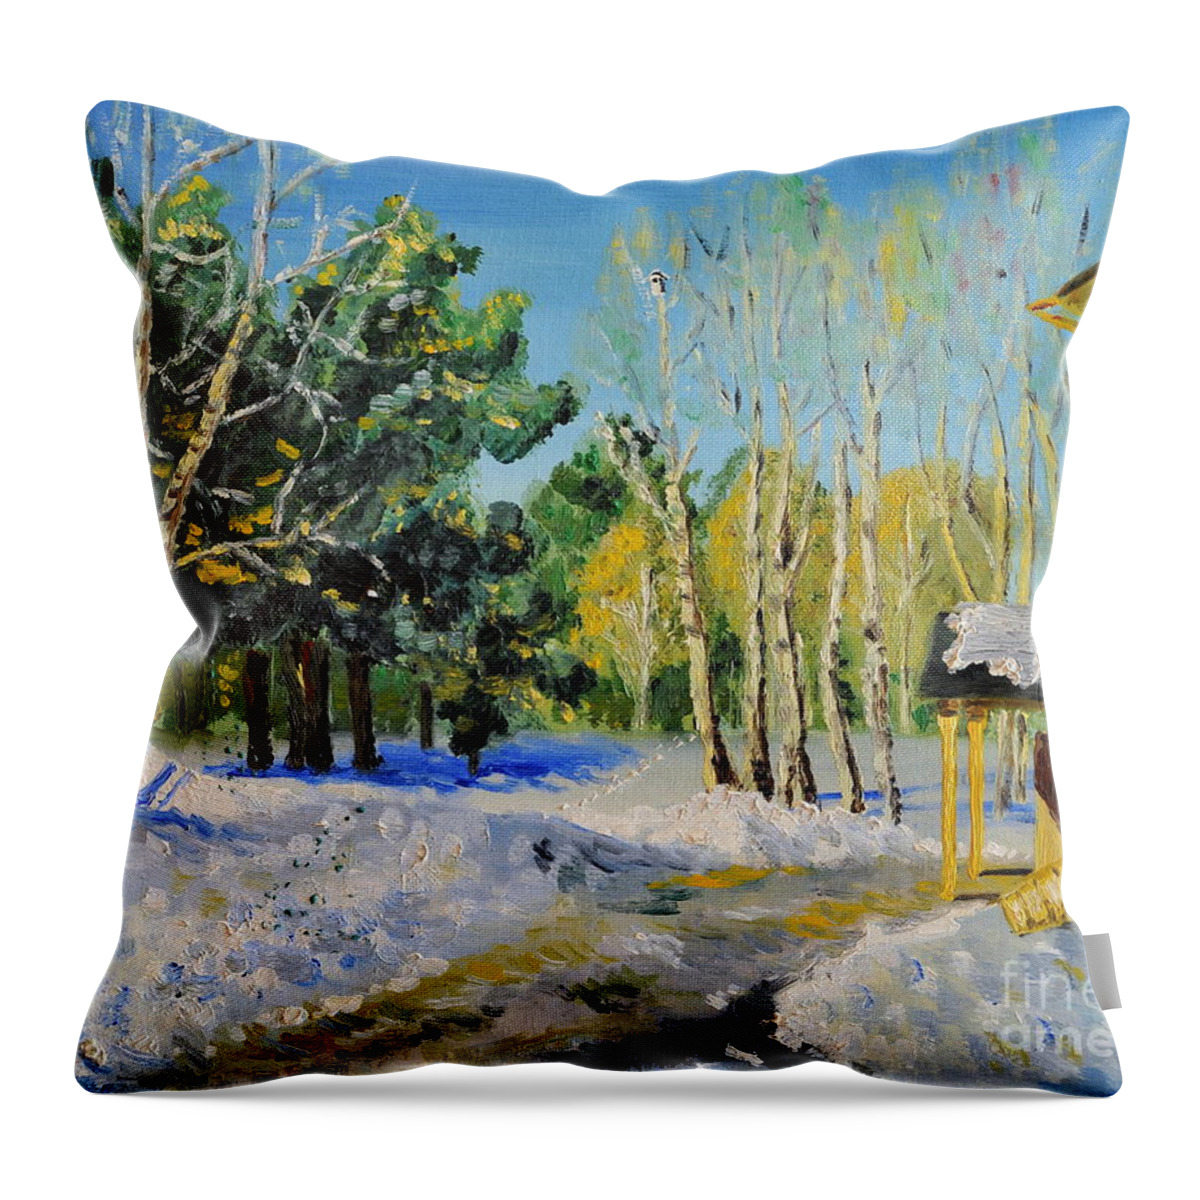 Landscape Throw Pillow featuring the painting Winter Day by Teresa Wegrzyn